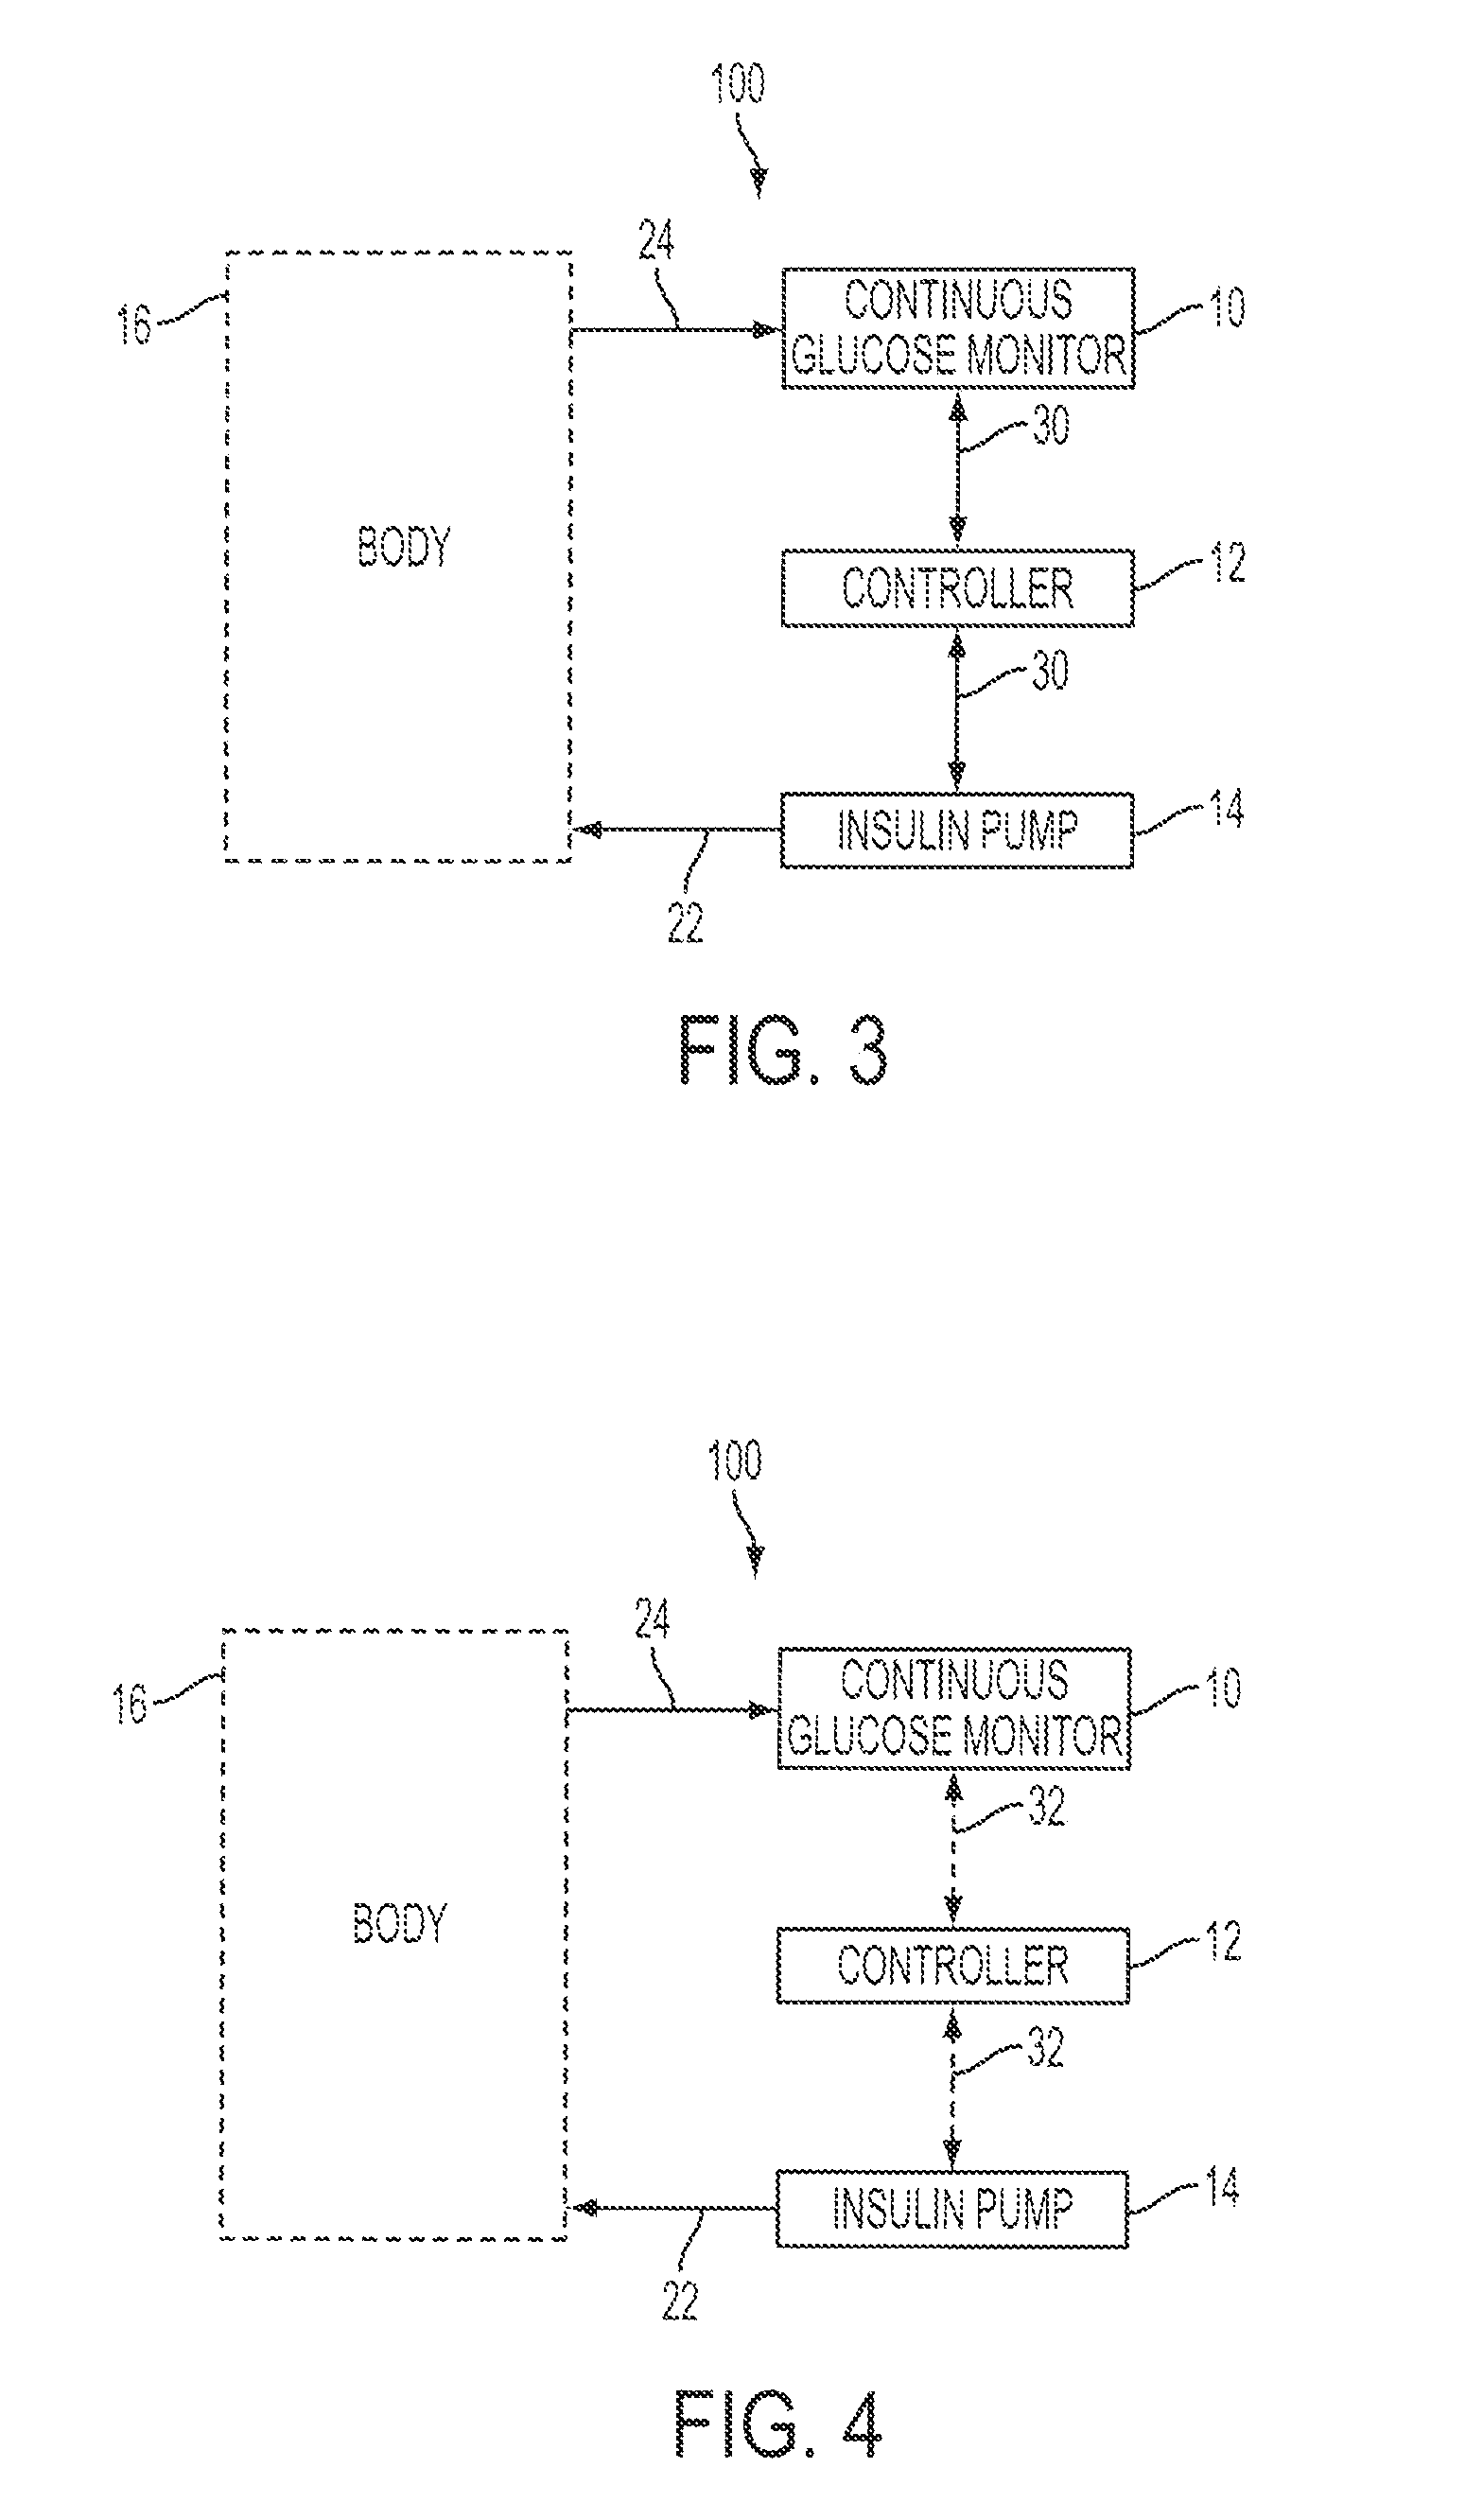 Predictive control based system and method for control of insulin delivery in diabetes using glucose sensing